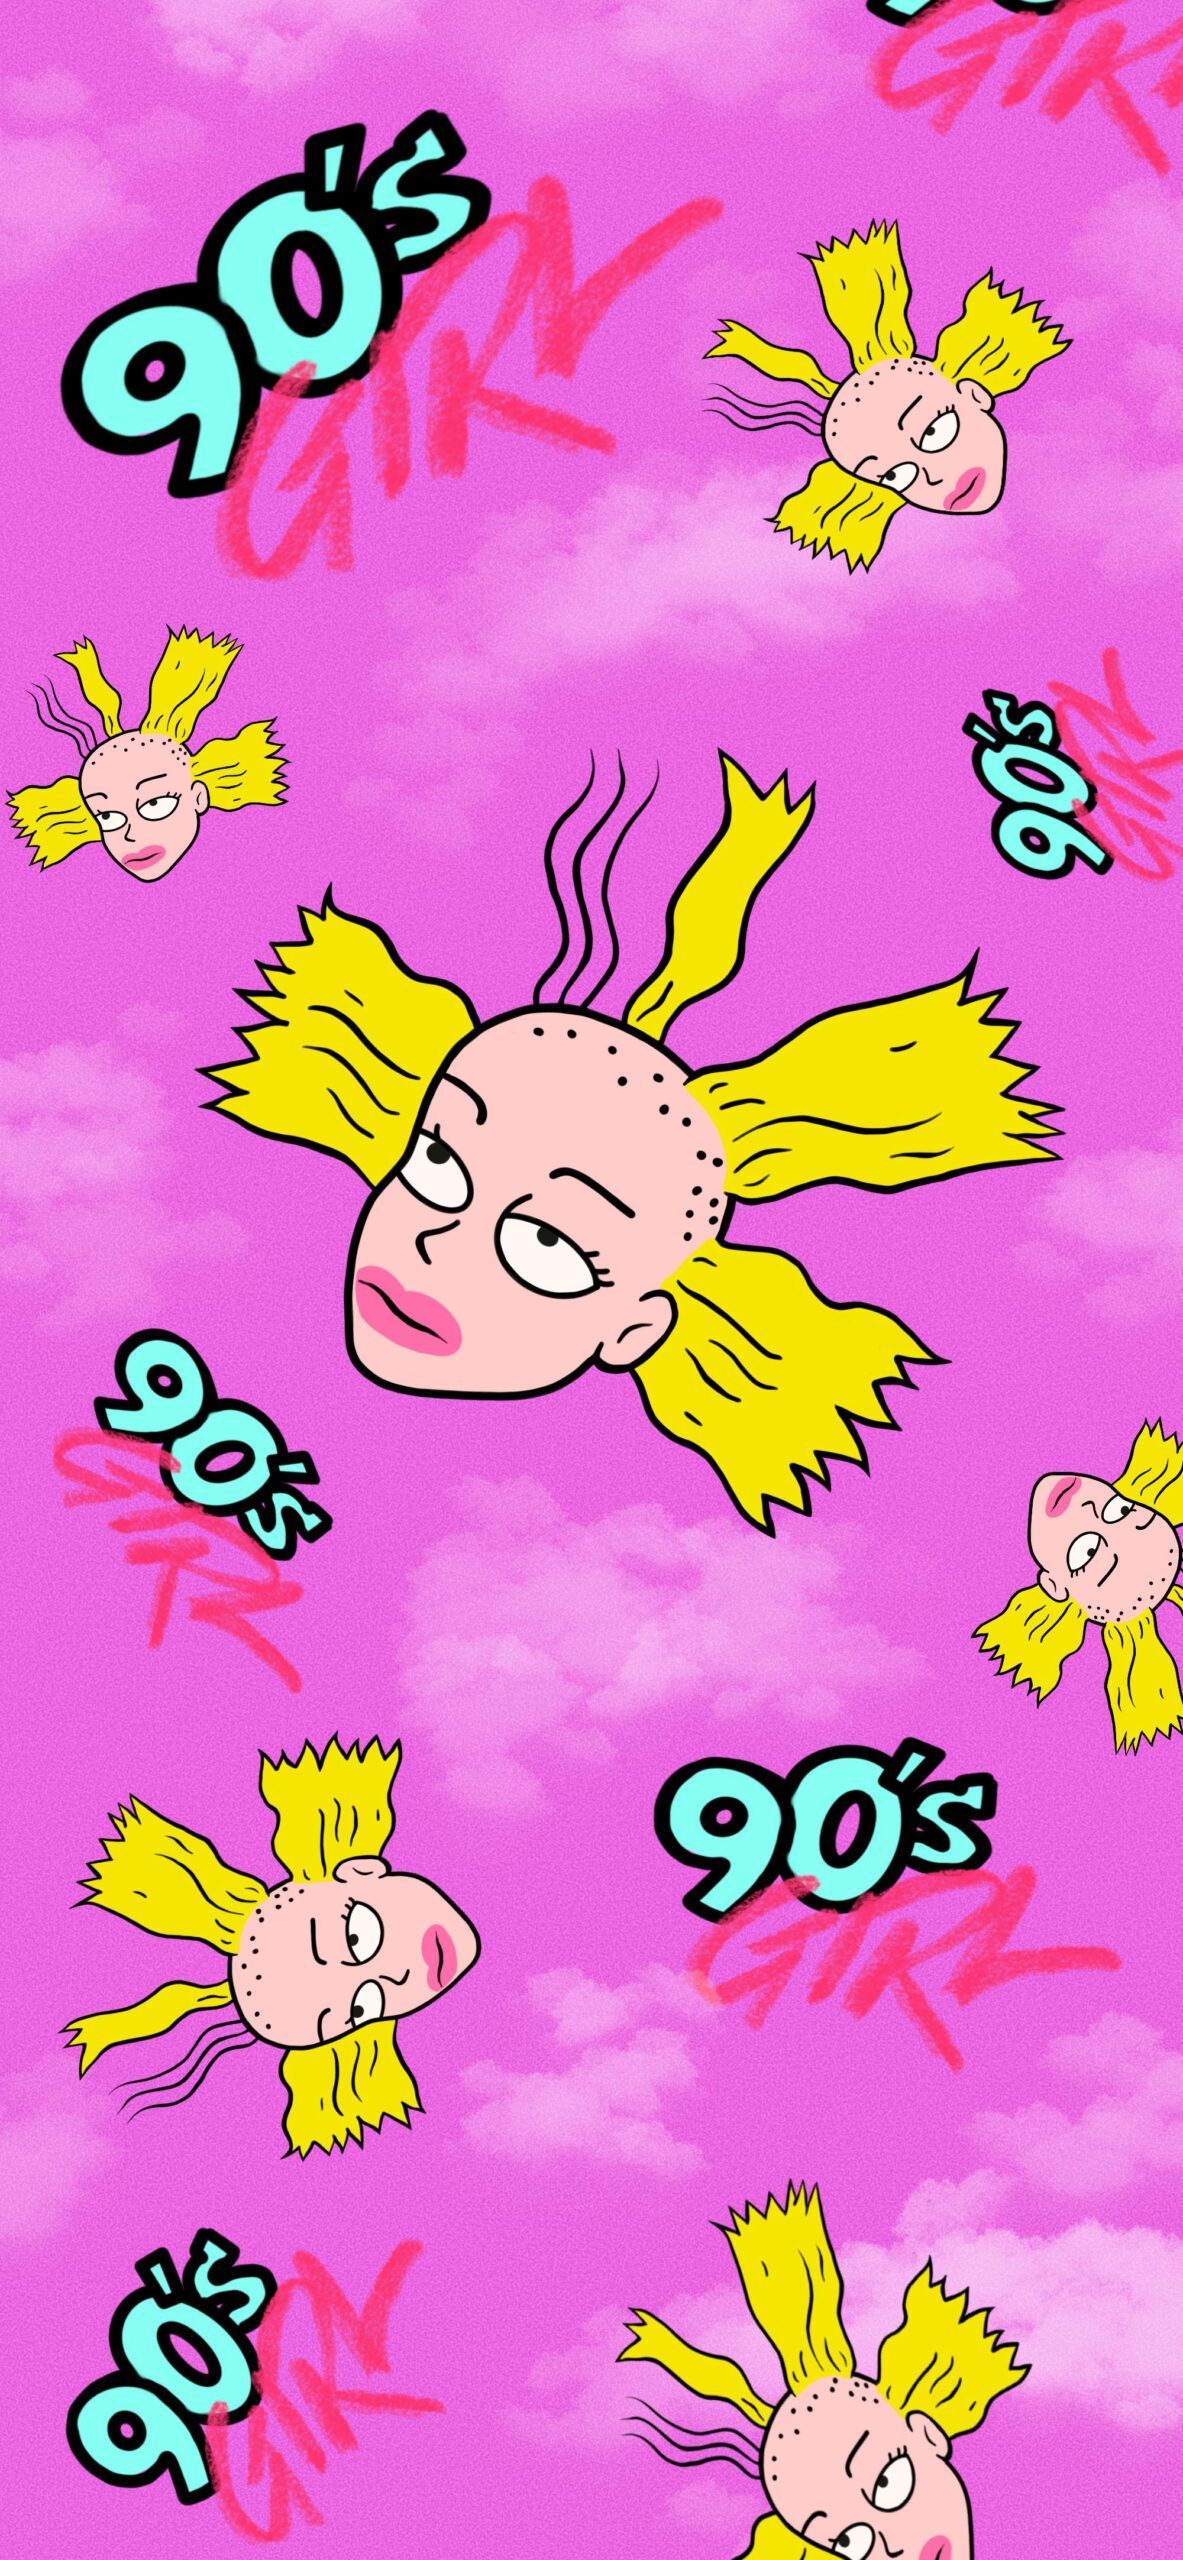 Rugrats Wallpaper for iPhone with Cynthia Pickles Doll